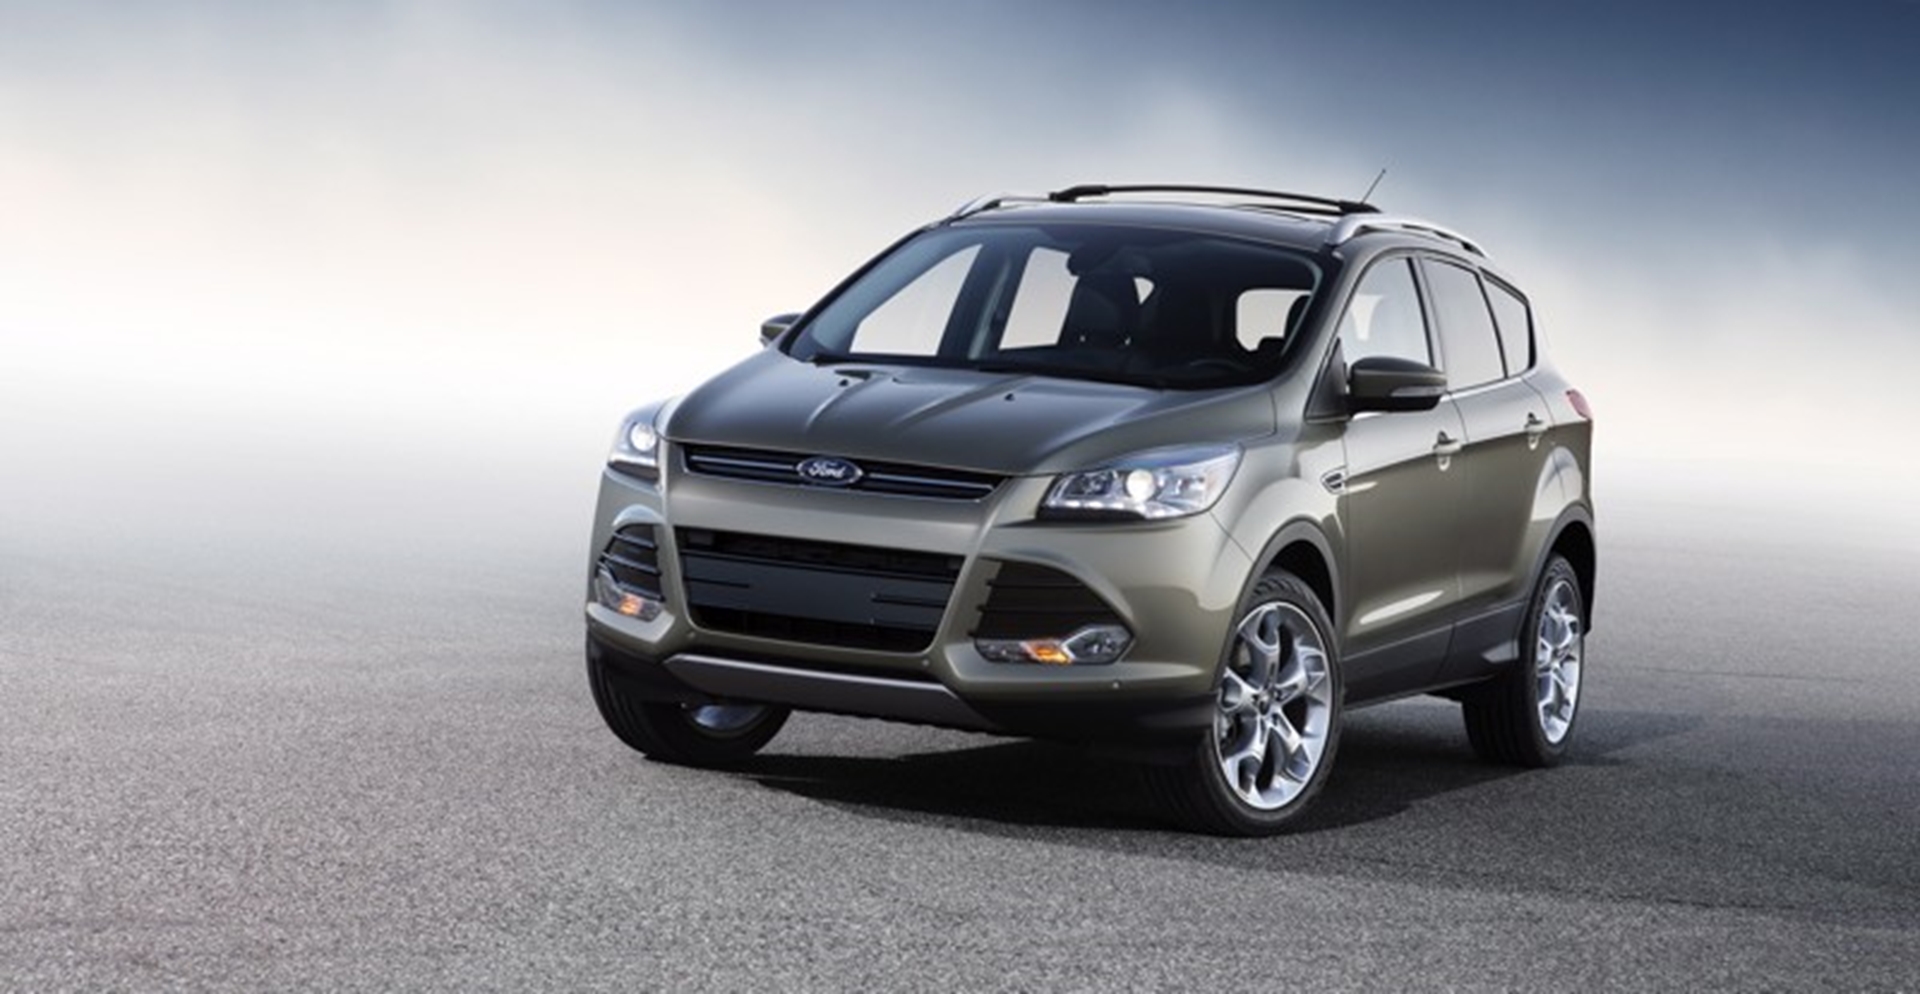 All-New Ford Escape Is the Smart Utility Vehicle That Responds to Customers